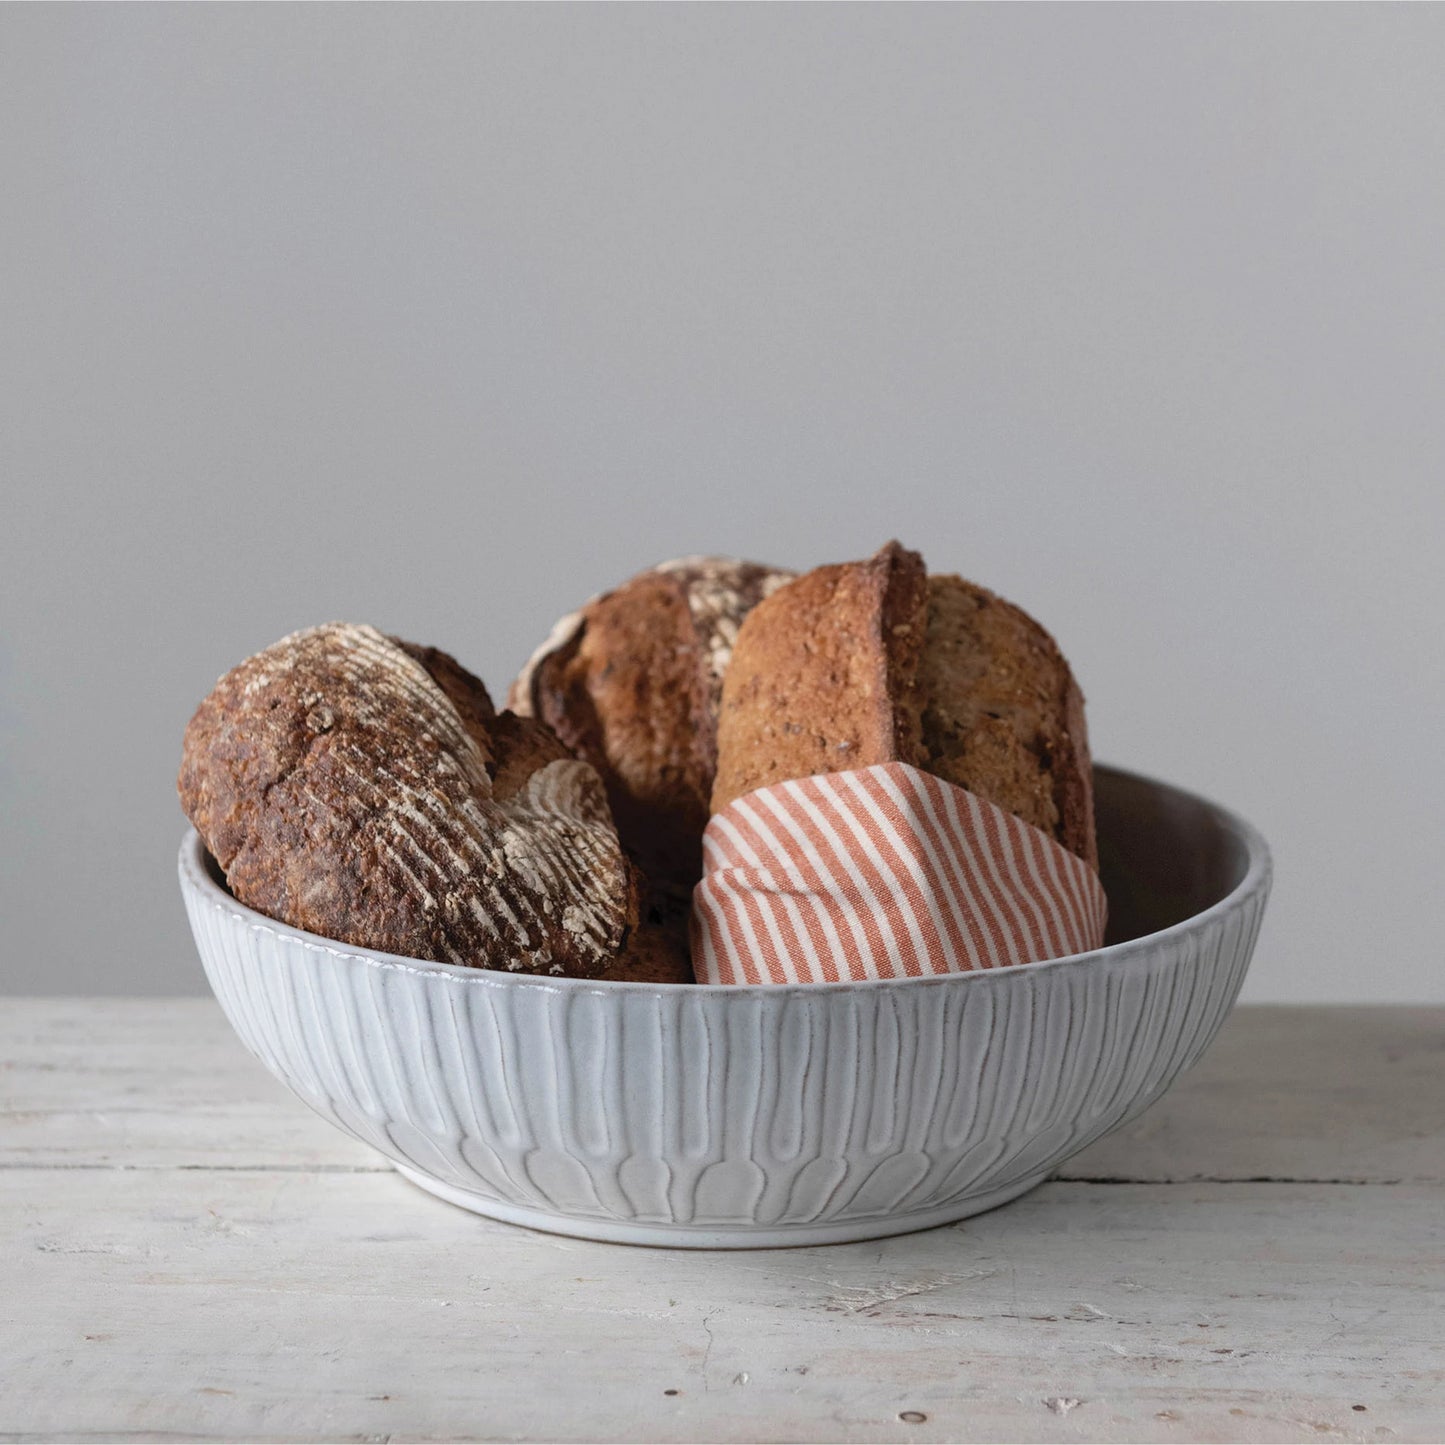 debossed stoneware bowl displayed with loaves bread inside on a white wooden table against a light gray background